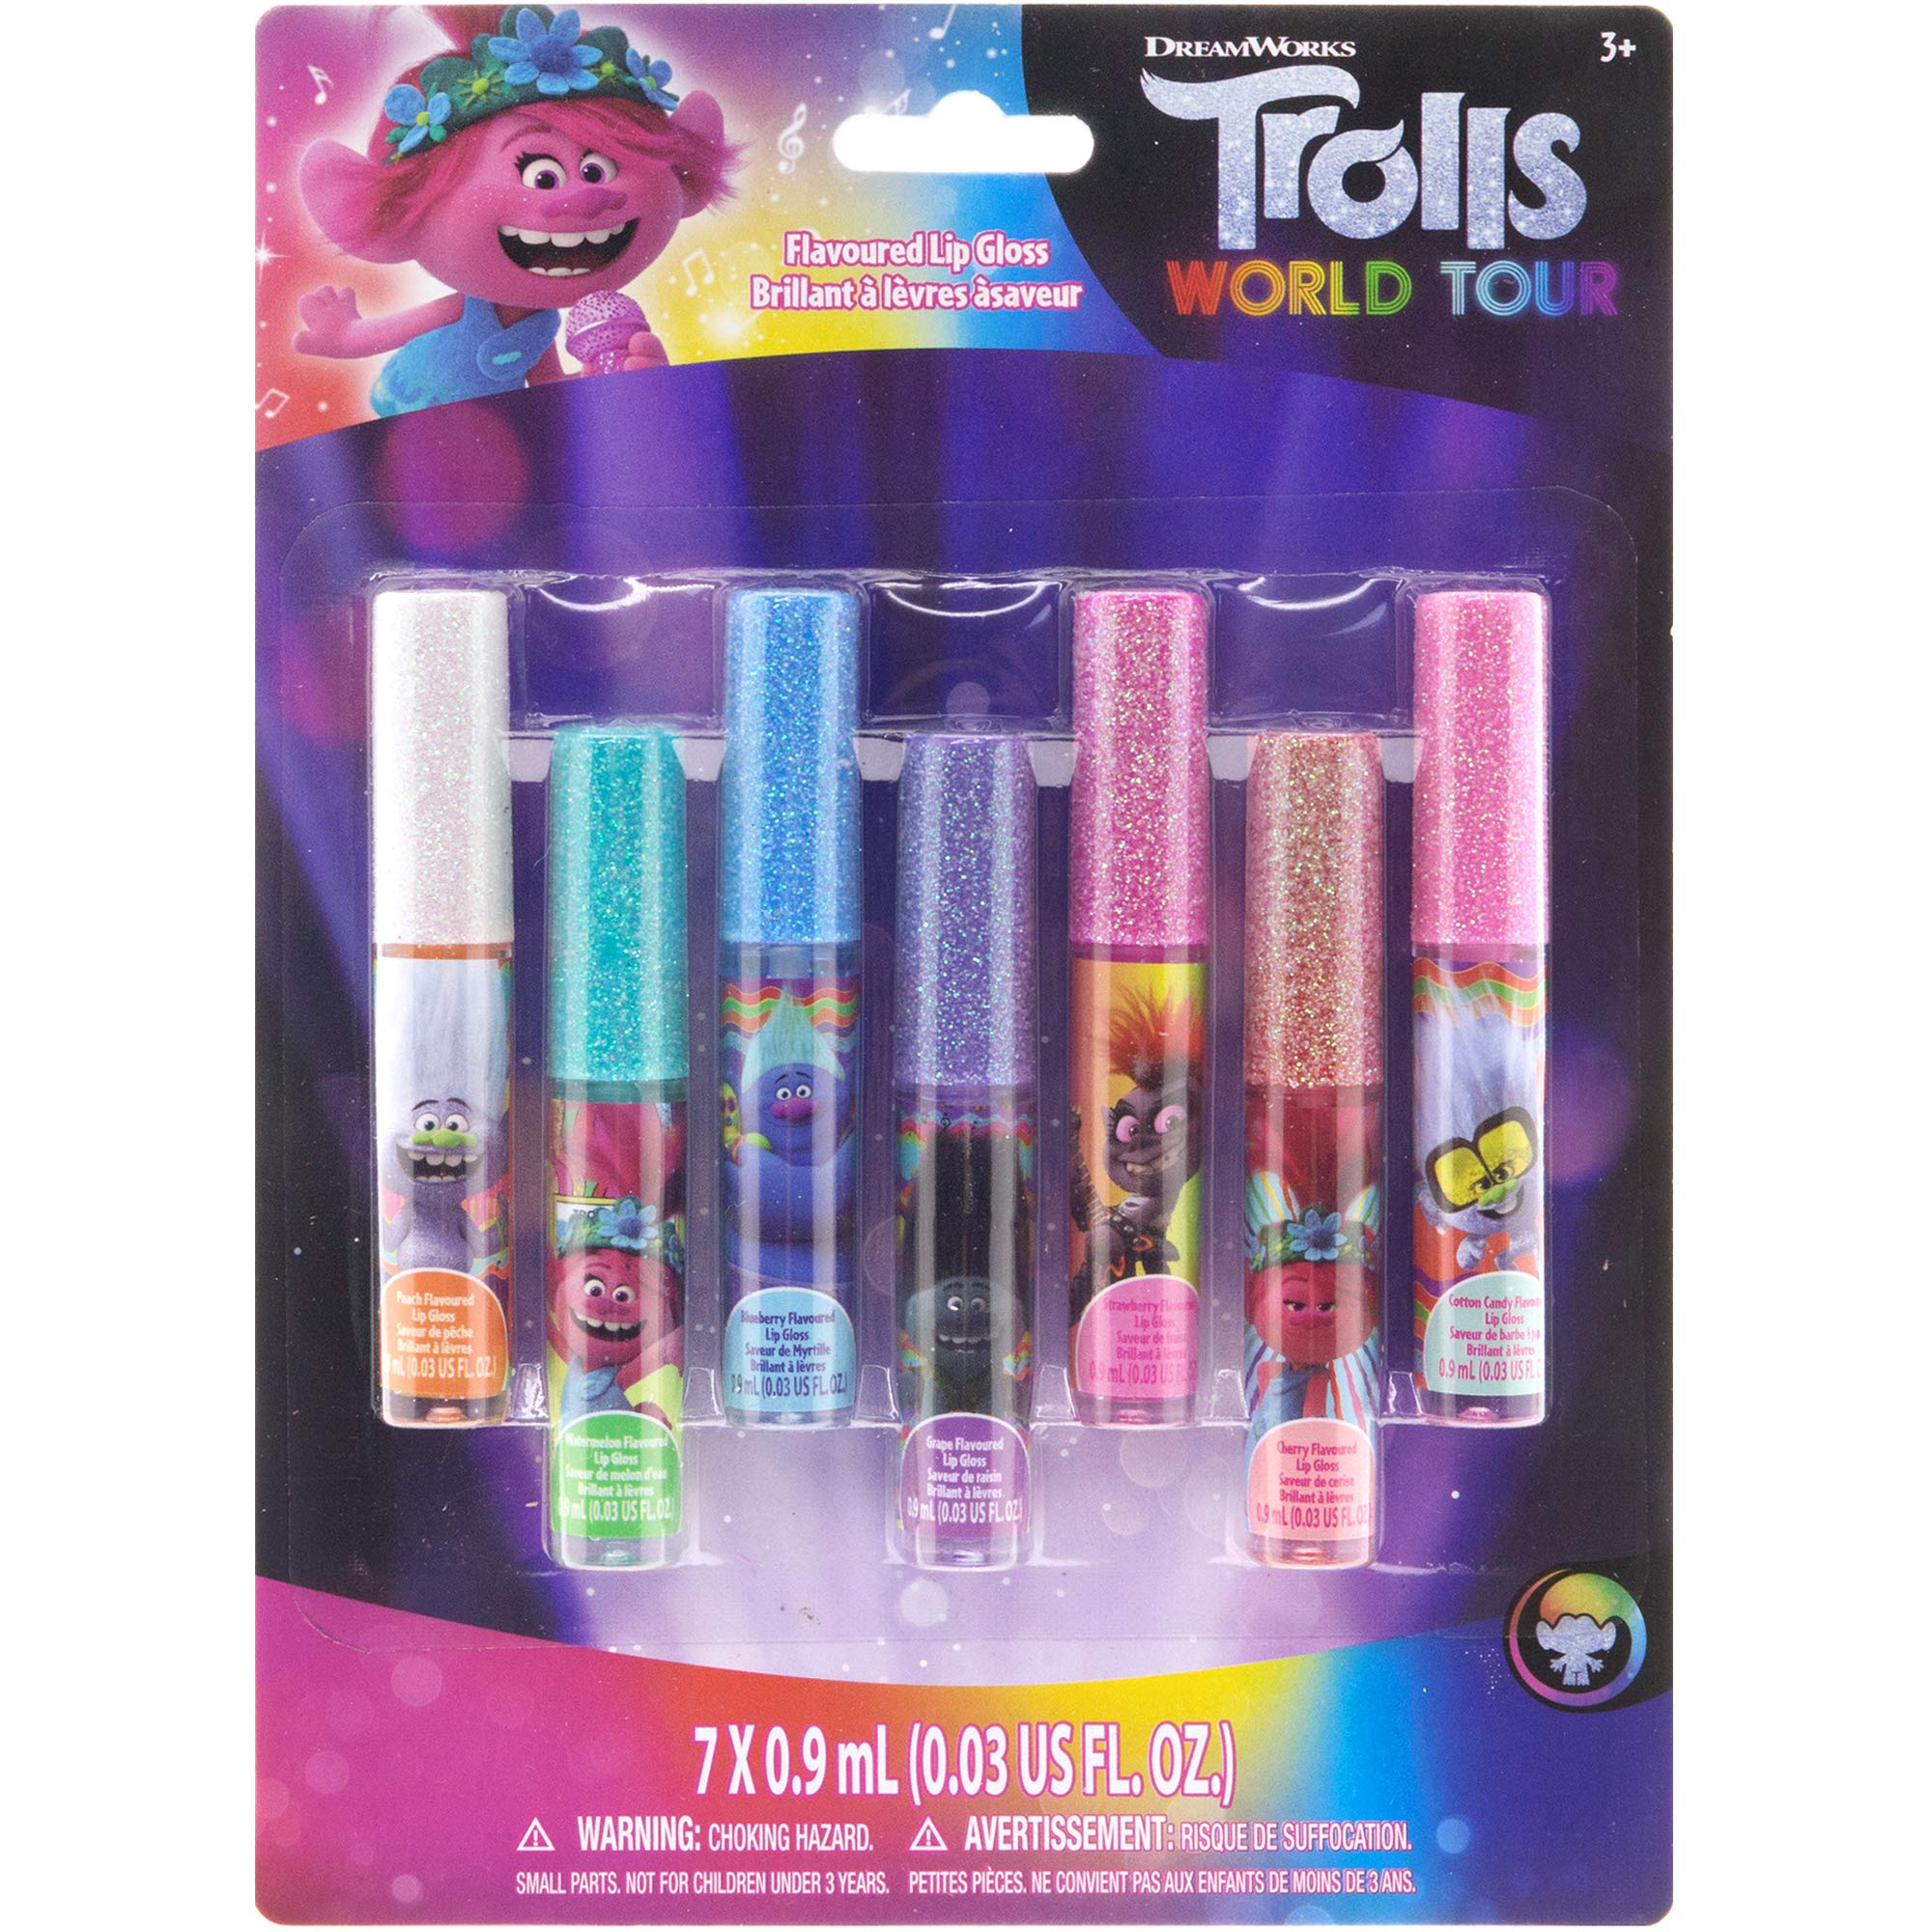 Bulk Crayons for Girls Ages 4-8 Set - Bundle with 48 Crayons for Toddlers  Featuring Barbie, Trolls, and Disney Princesses for Party Favors